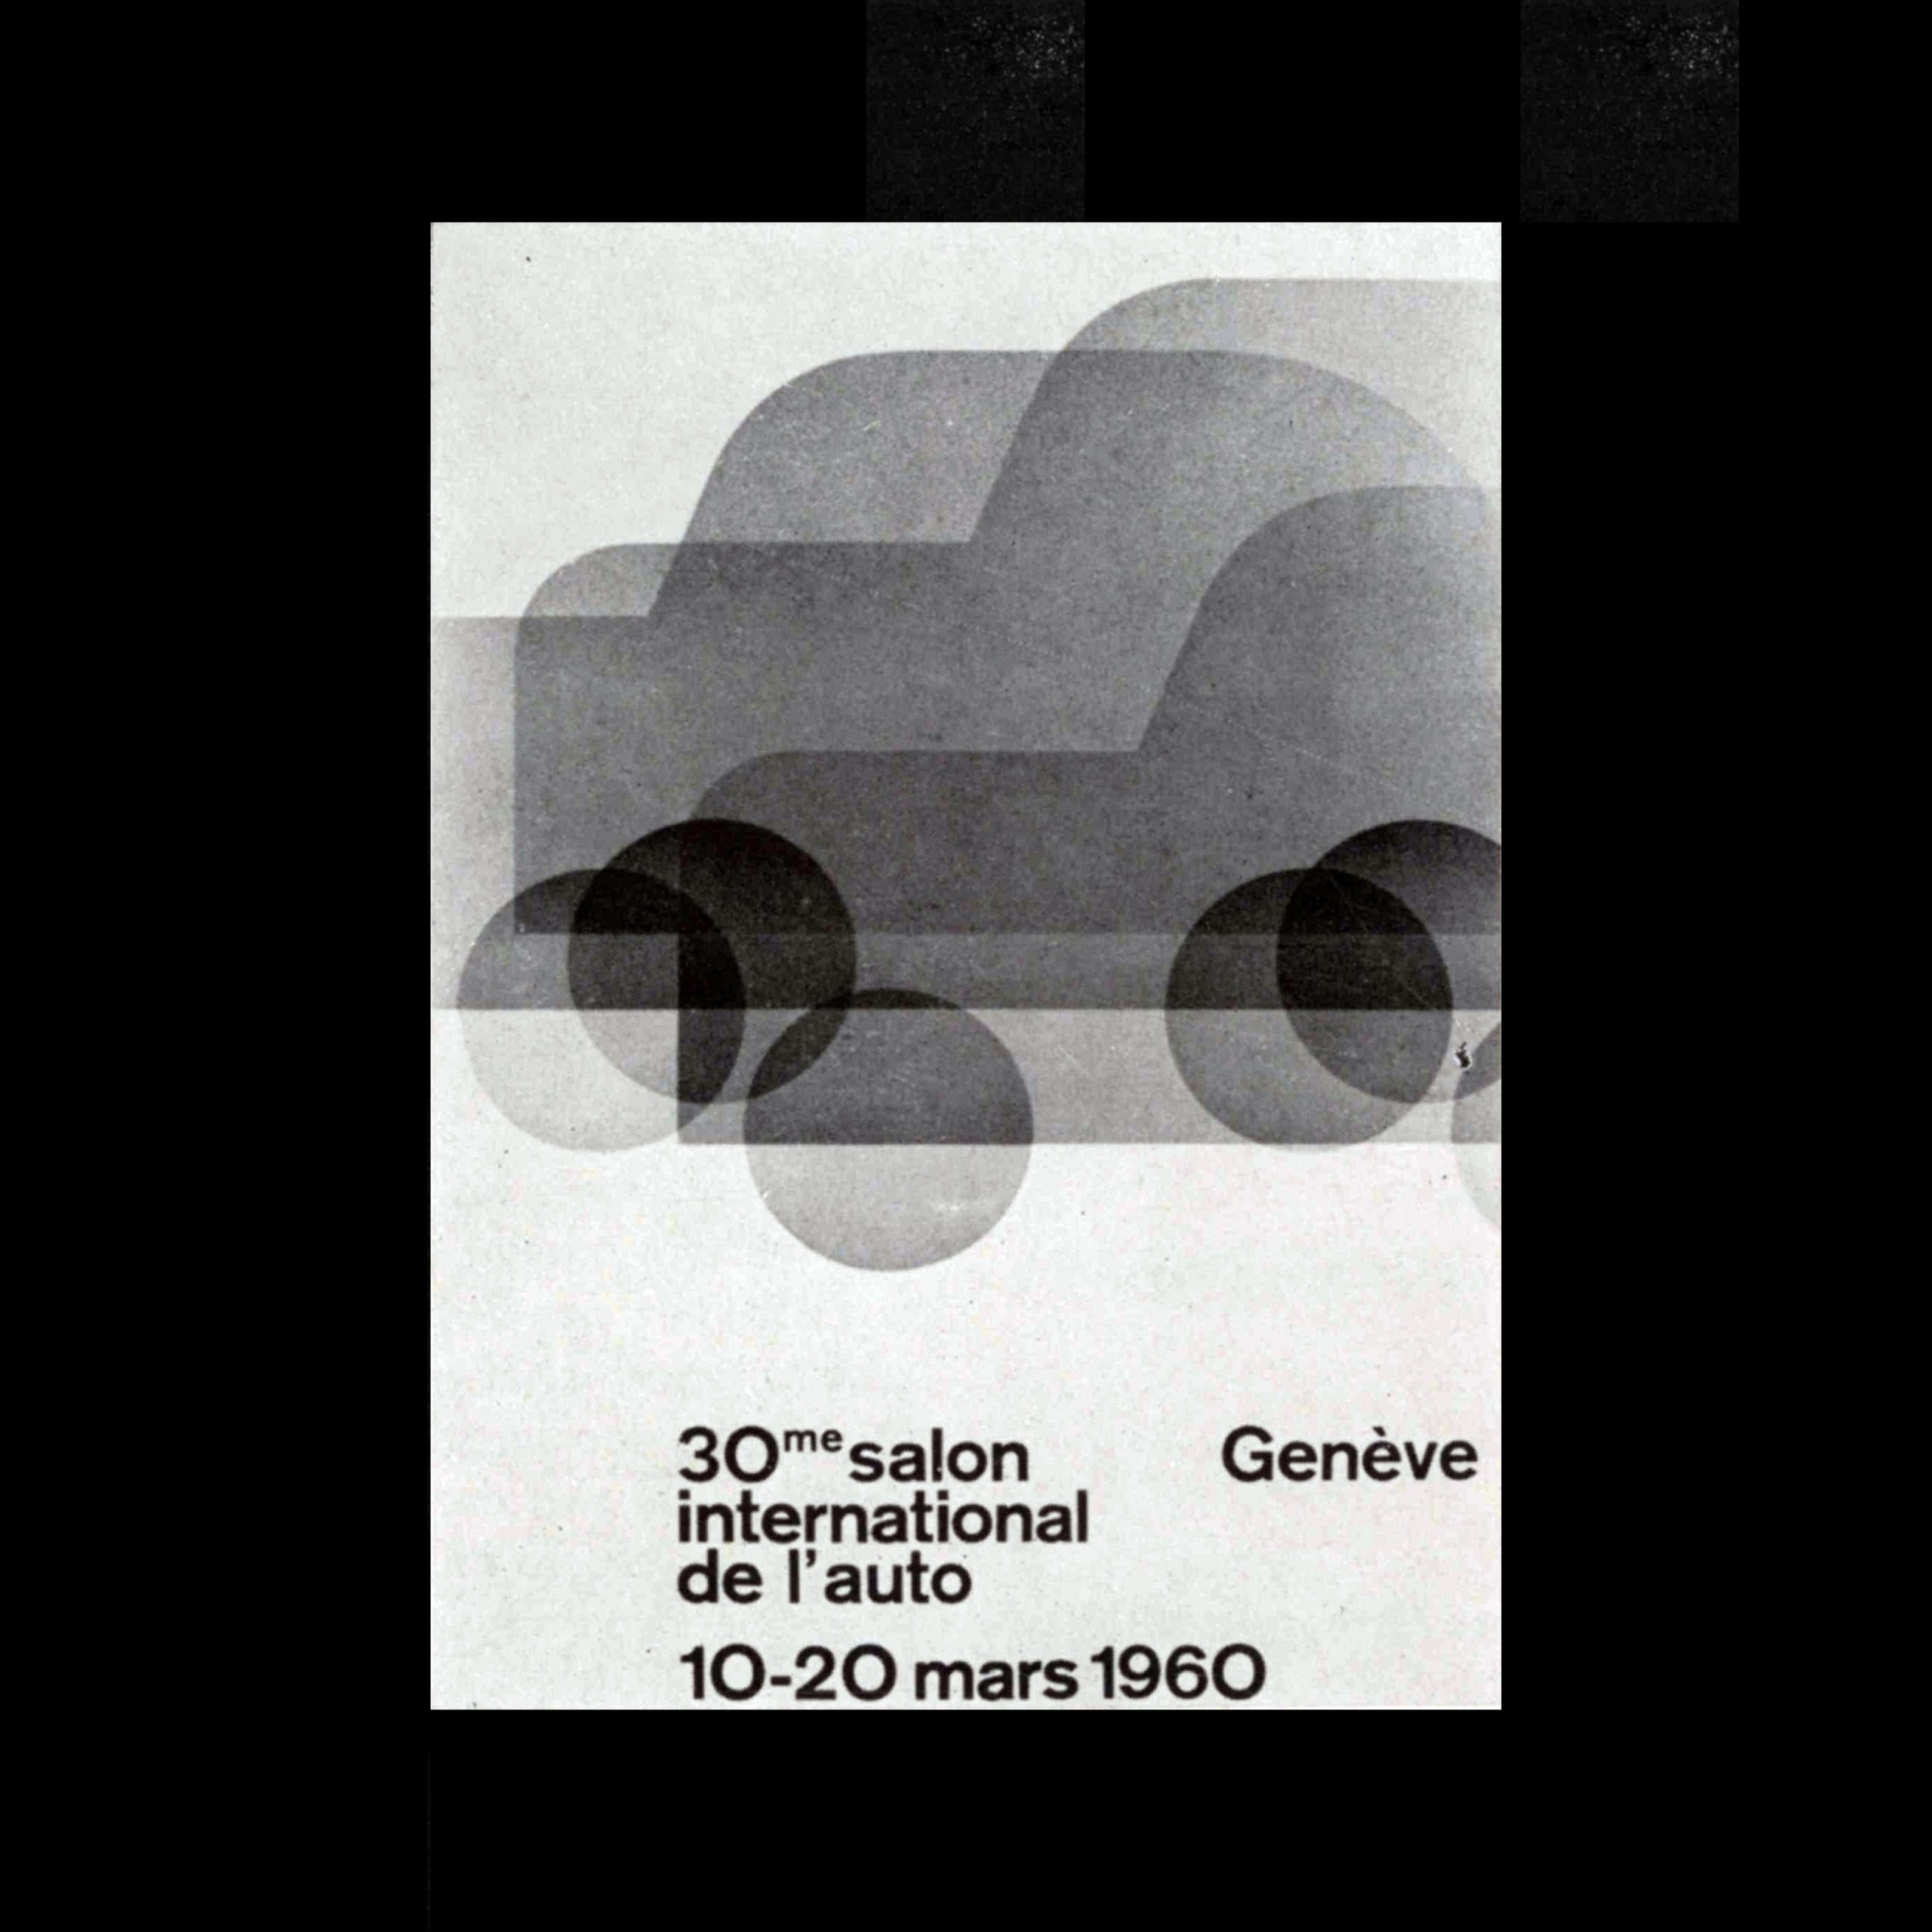 Poster for the 30th International Automobile Salon in Geneva designed by Georges Calame